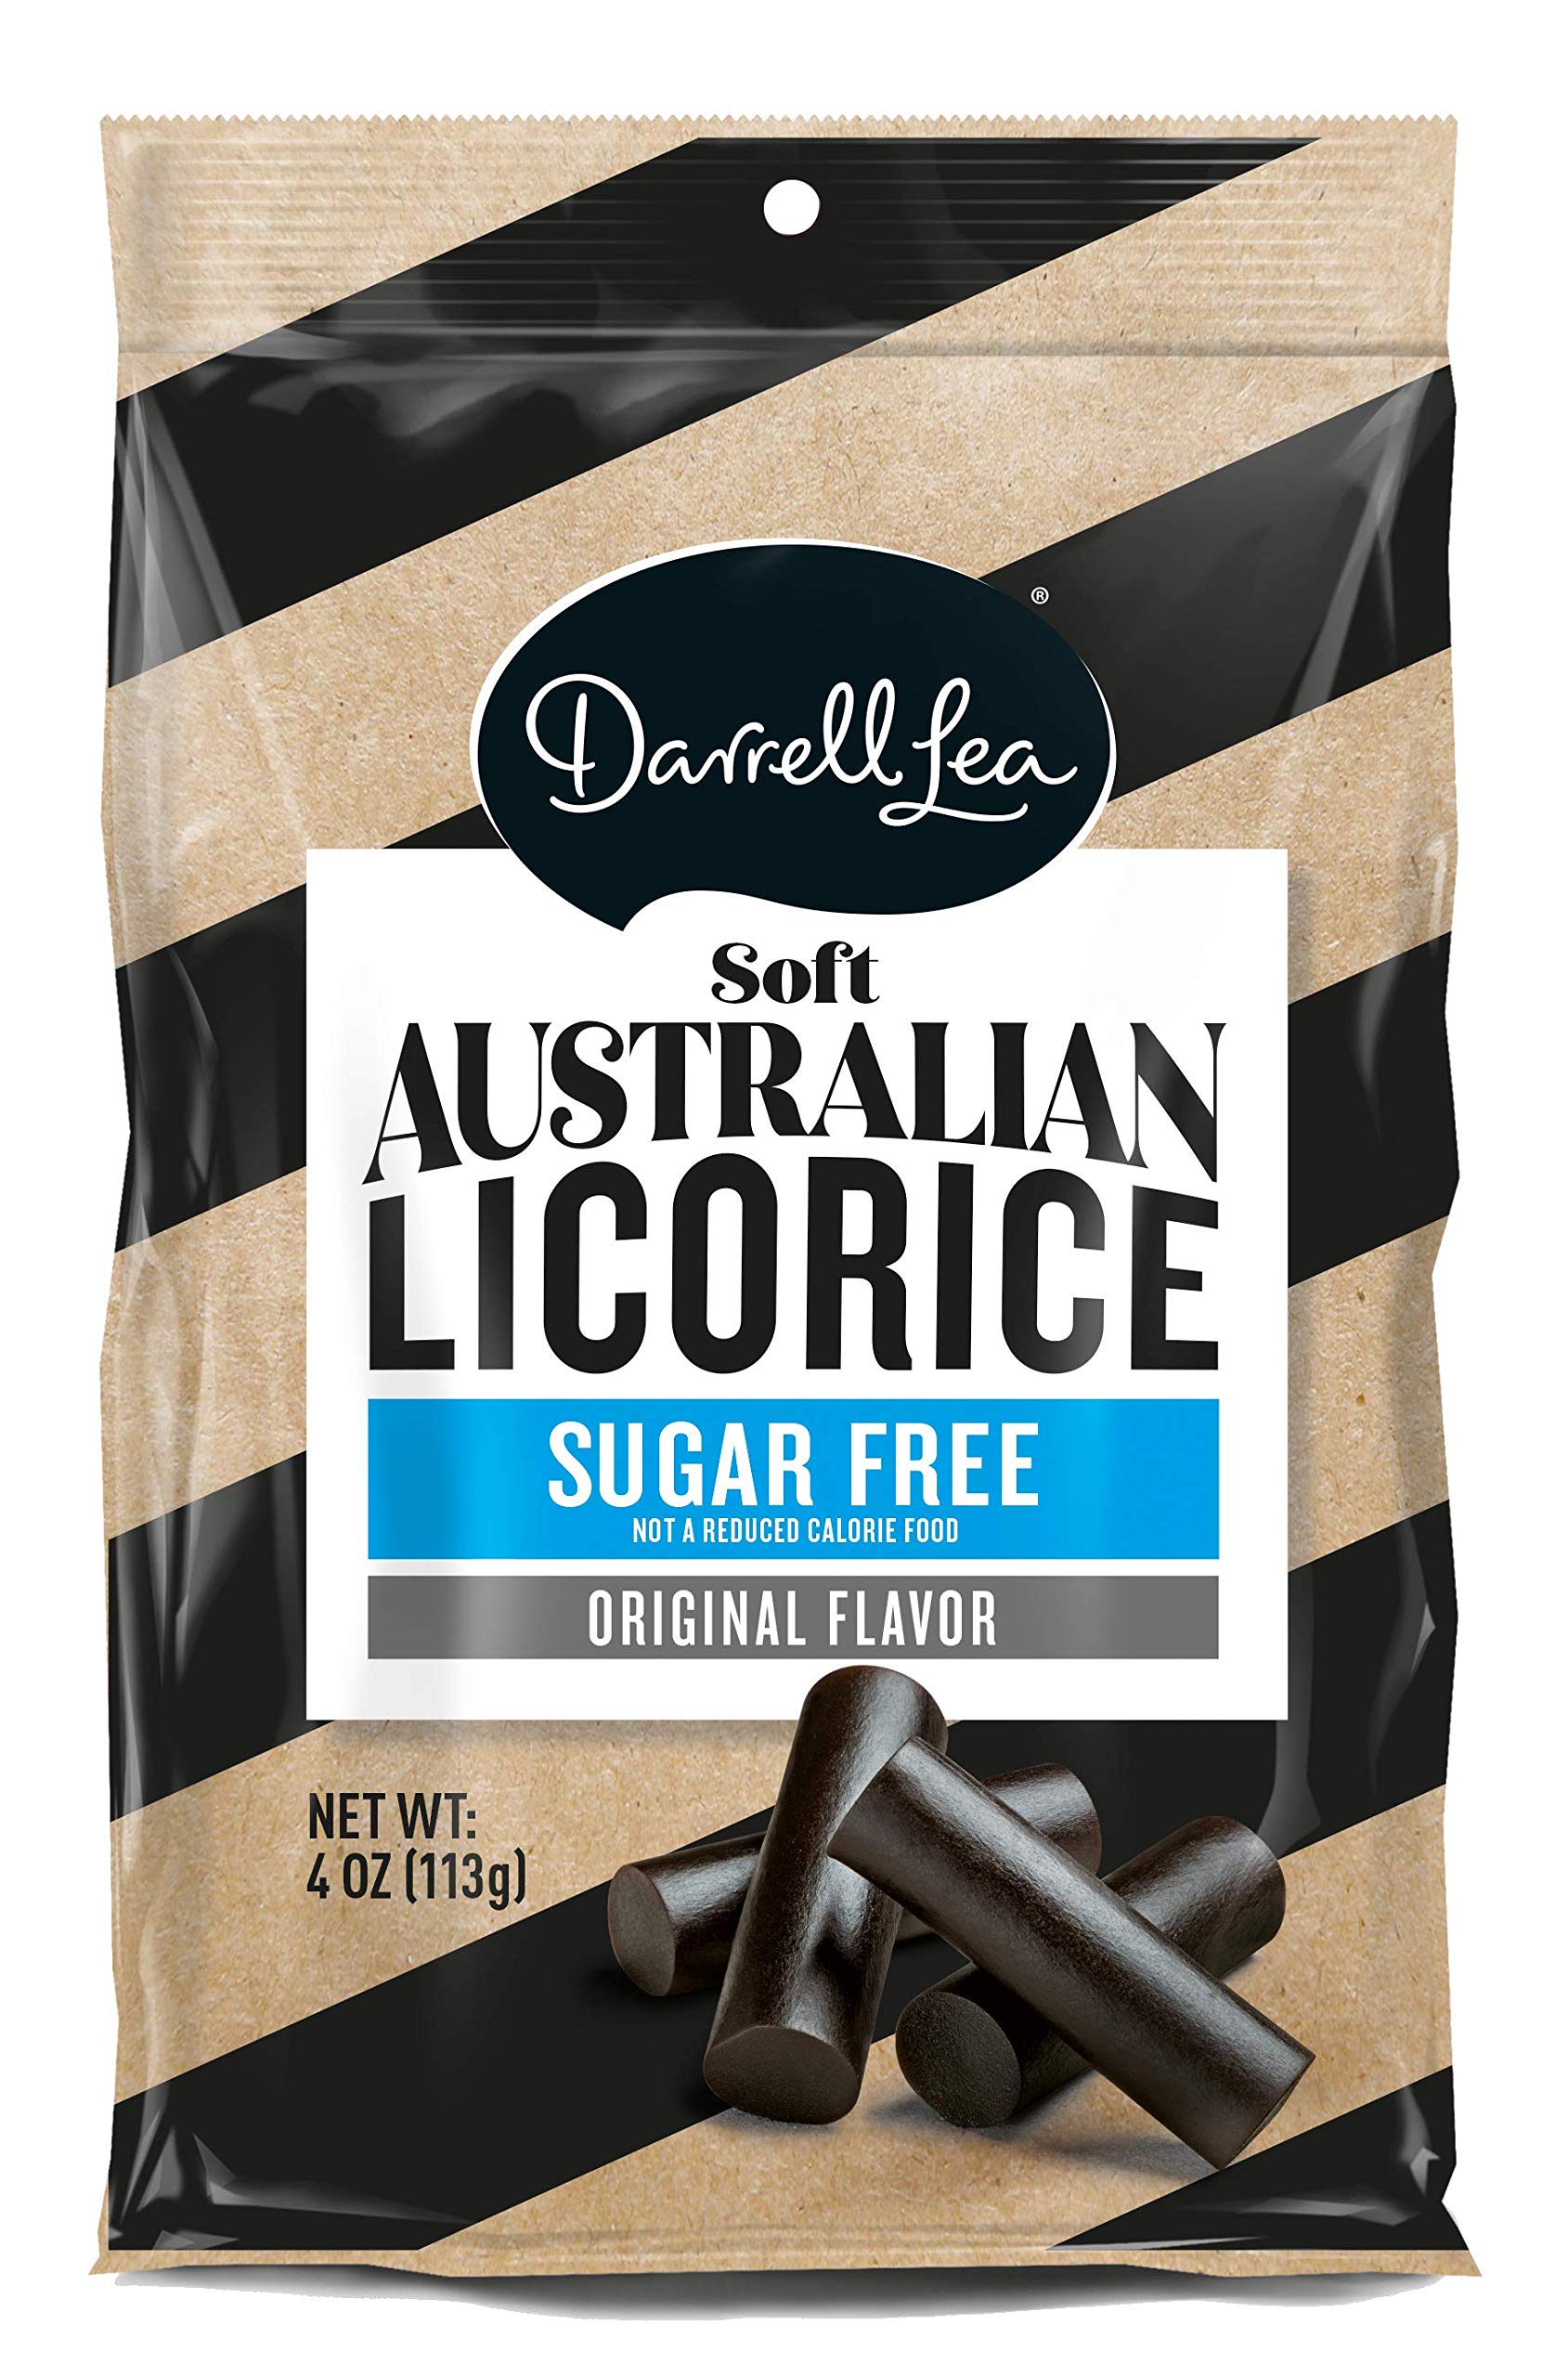 Book Cover Darrell Lea Sugar Free Black Soft Australian Made Licorice 4oz Bag - NON-GMO, Palm Oil Free, NO HFCS & Kosher | Made in Small Batches with Ethically-Sourced, Quality Ingredients Sugar Free Black 1 Count (Pack of 1)